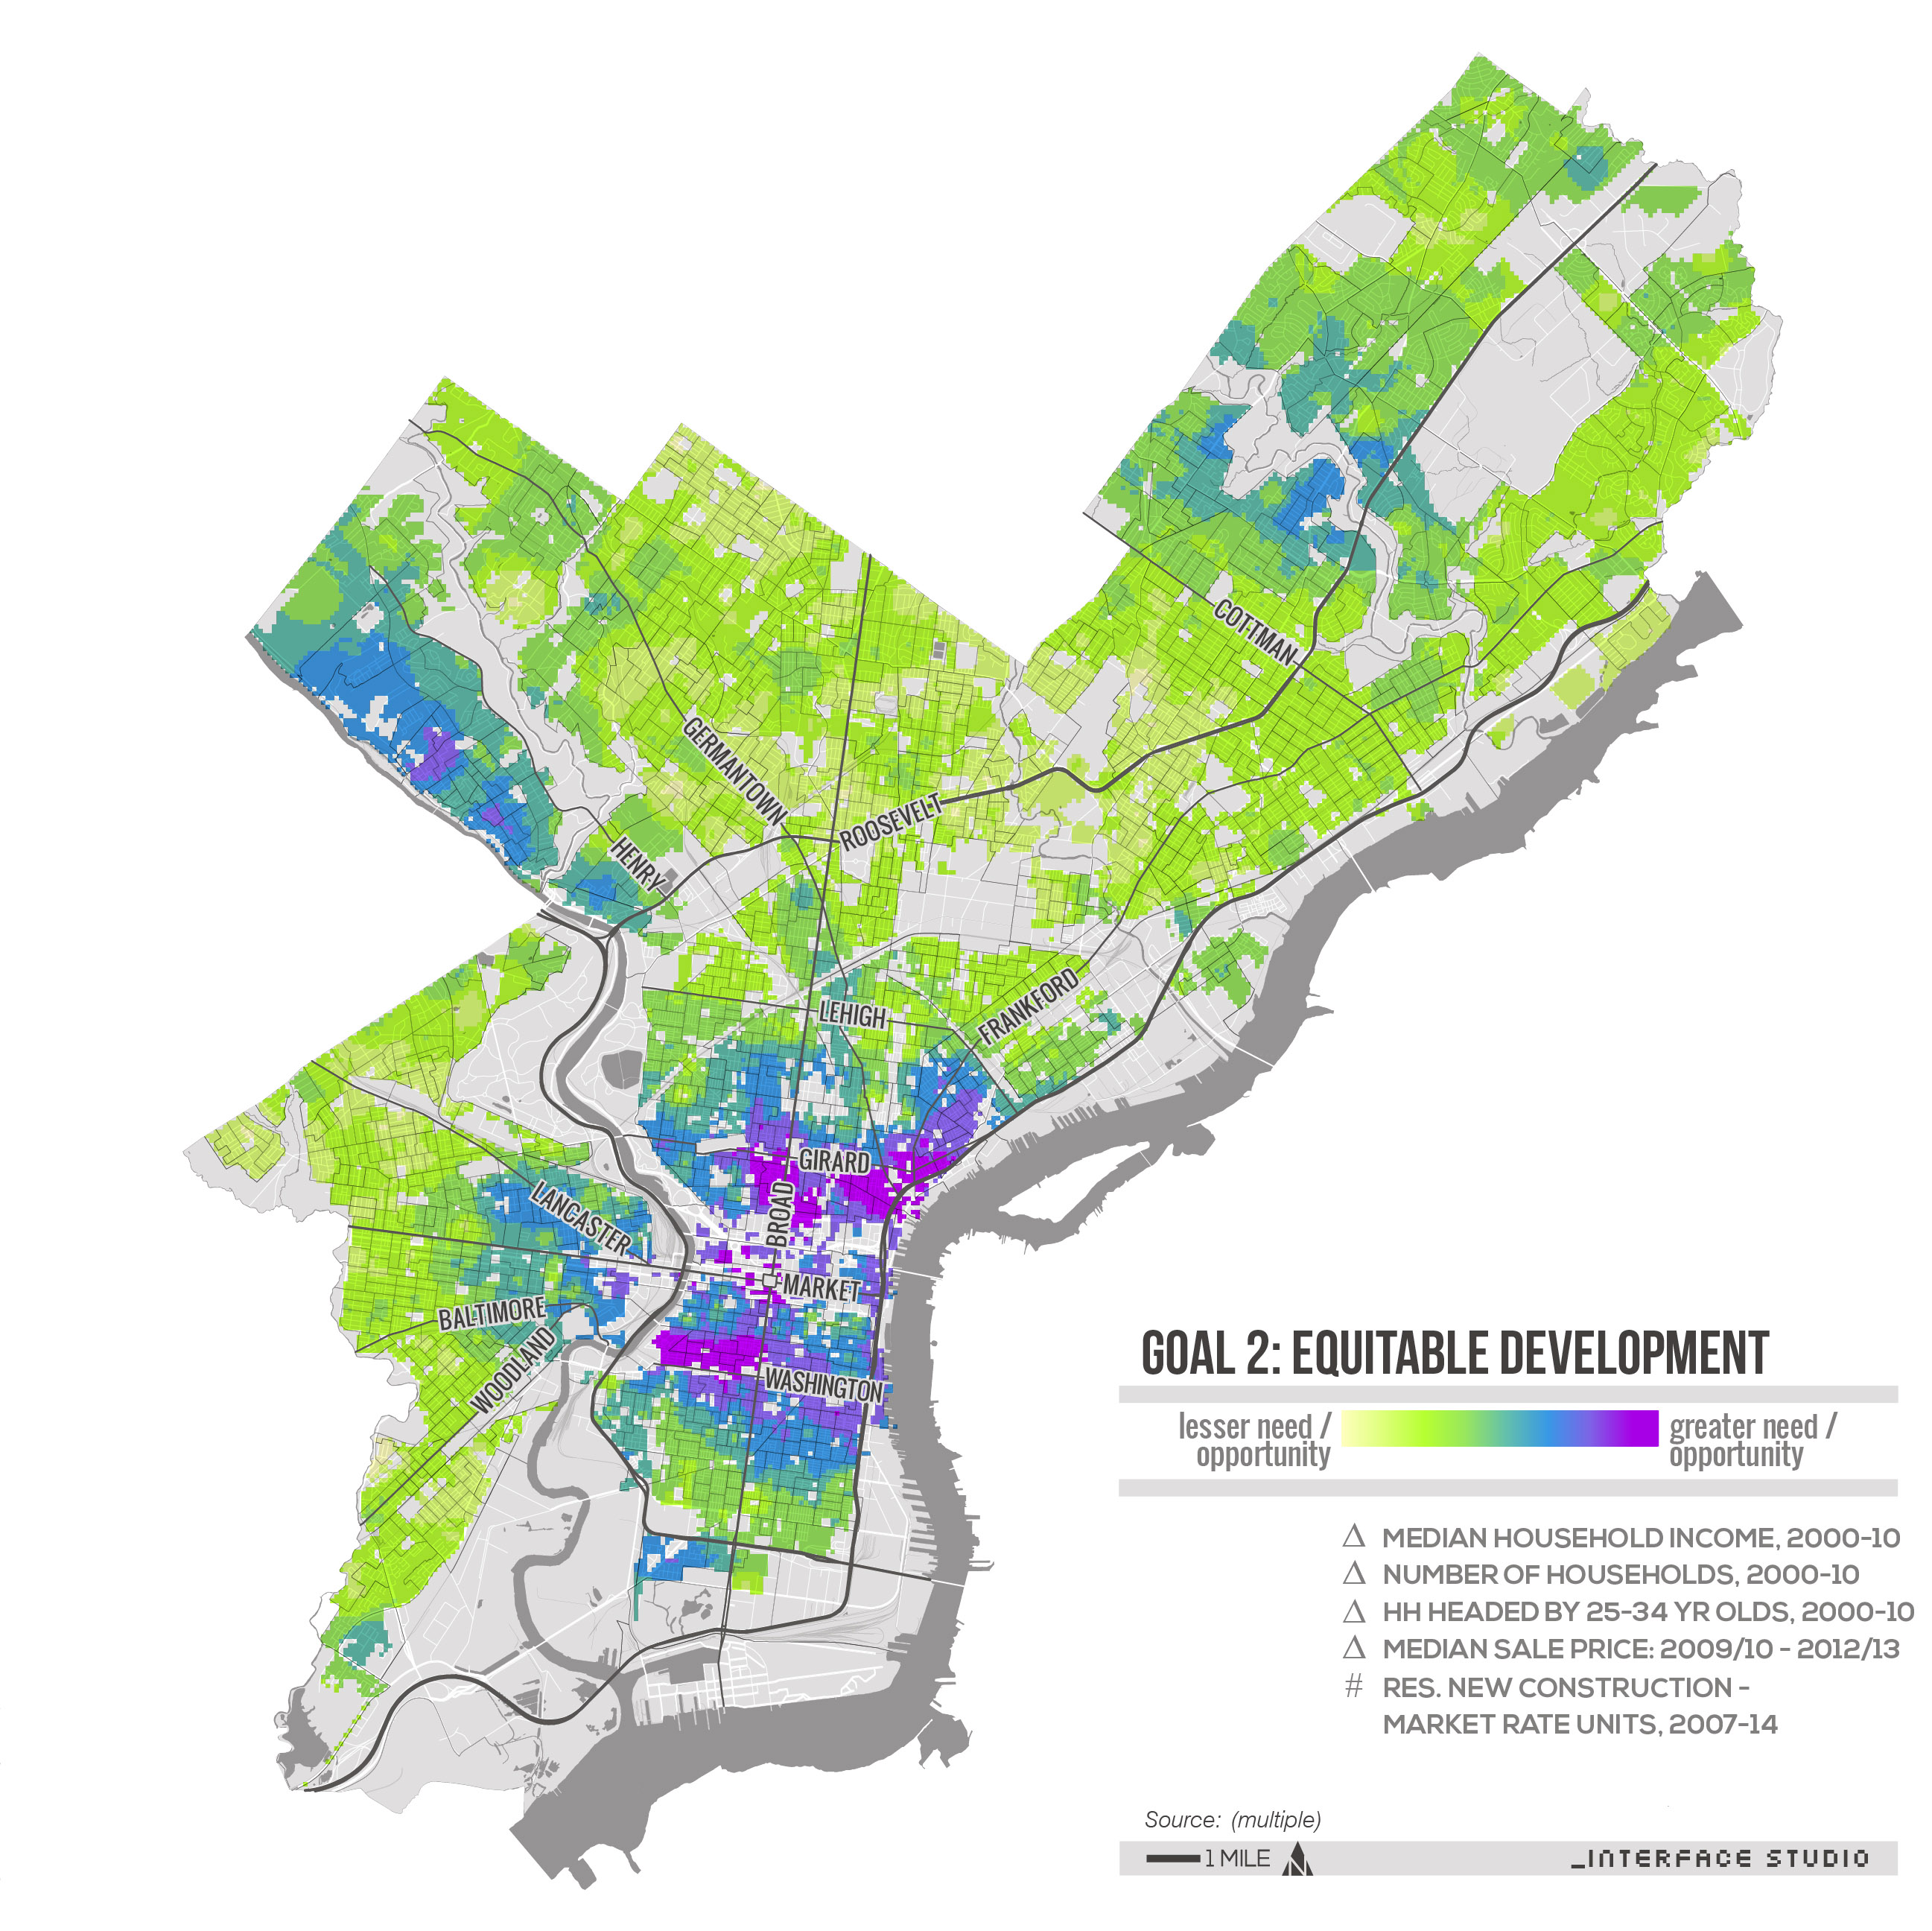 Purple and blue hot spots indicate the best locations to expand housing choice and affordability in Philadelphia